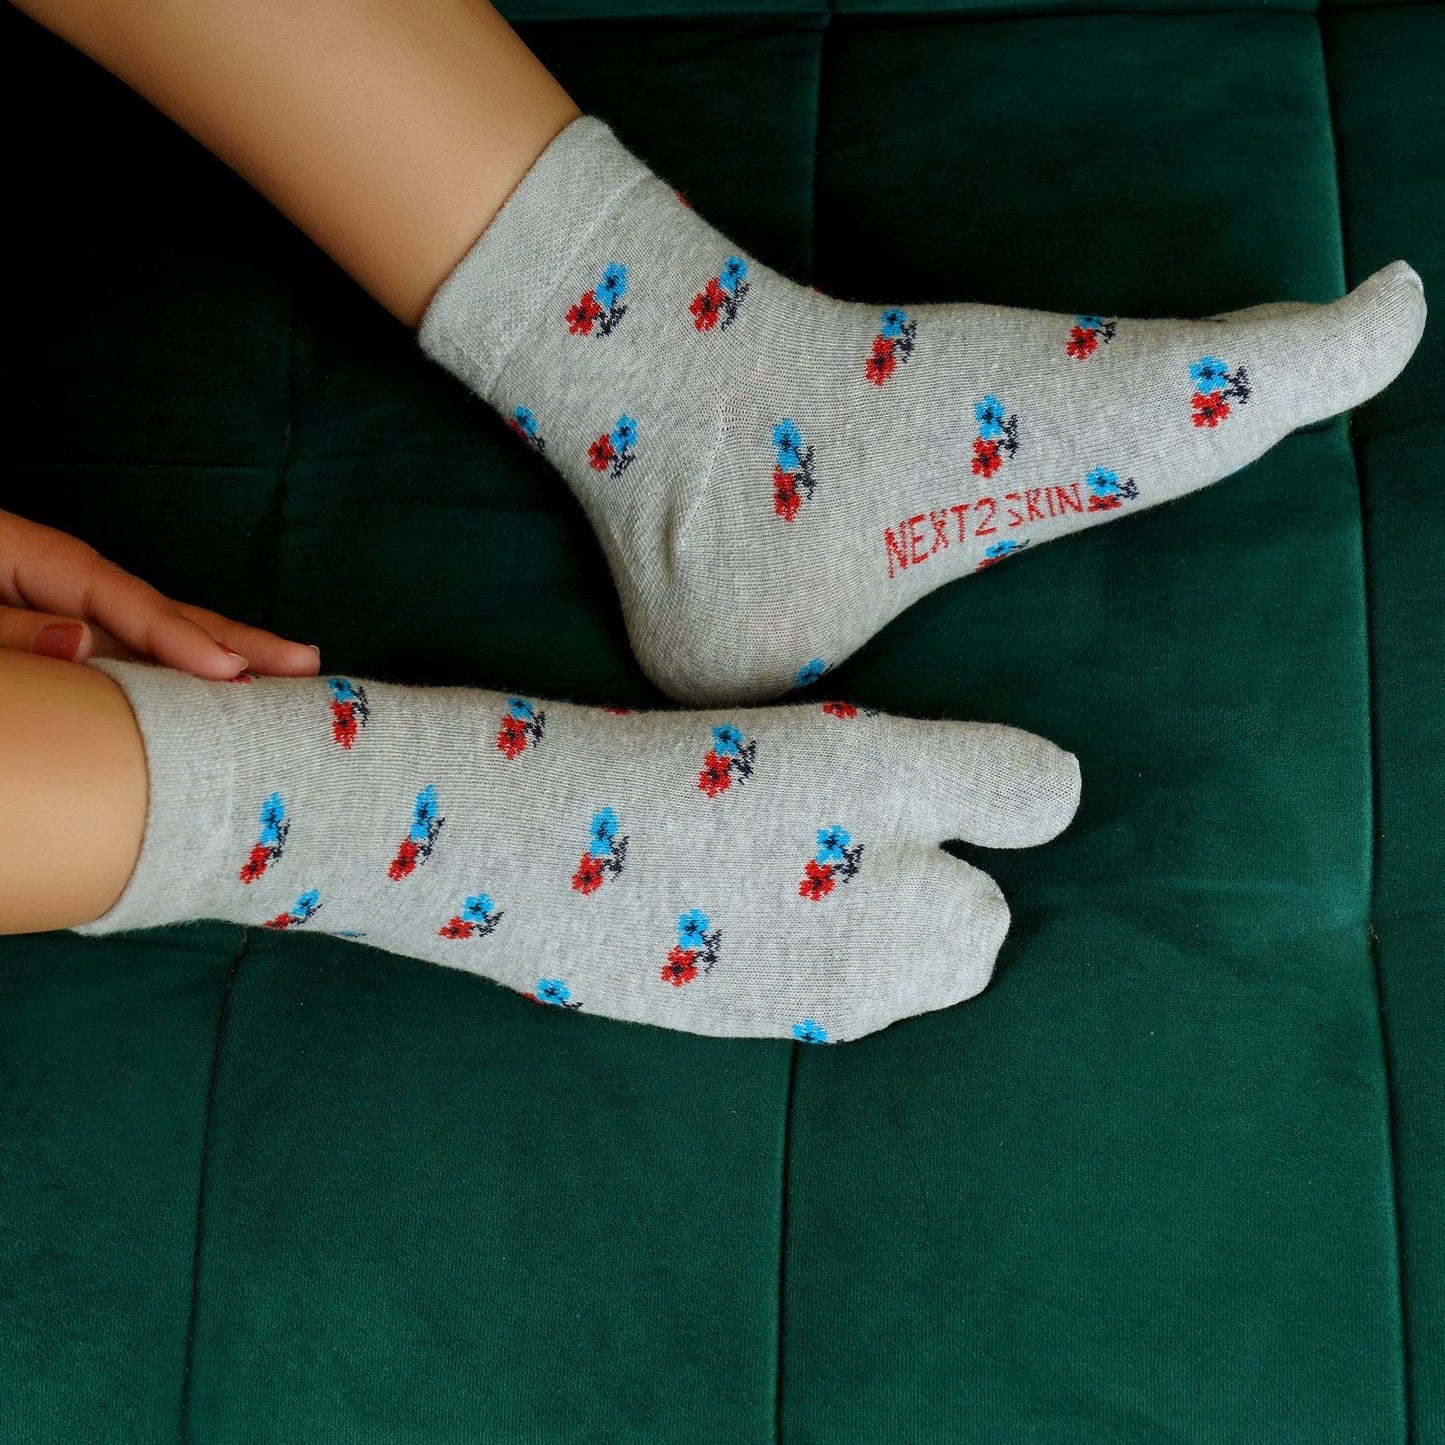 Ankle Thumb Floral Cotton Socks (Grey)